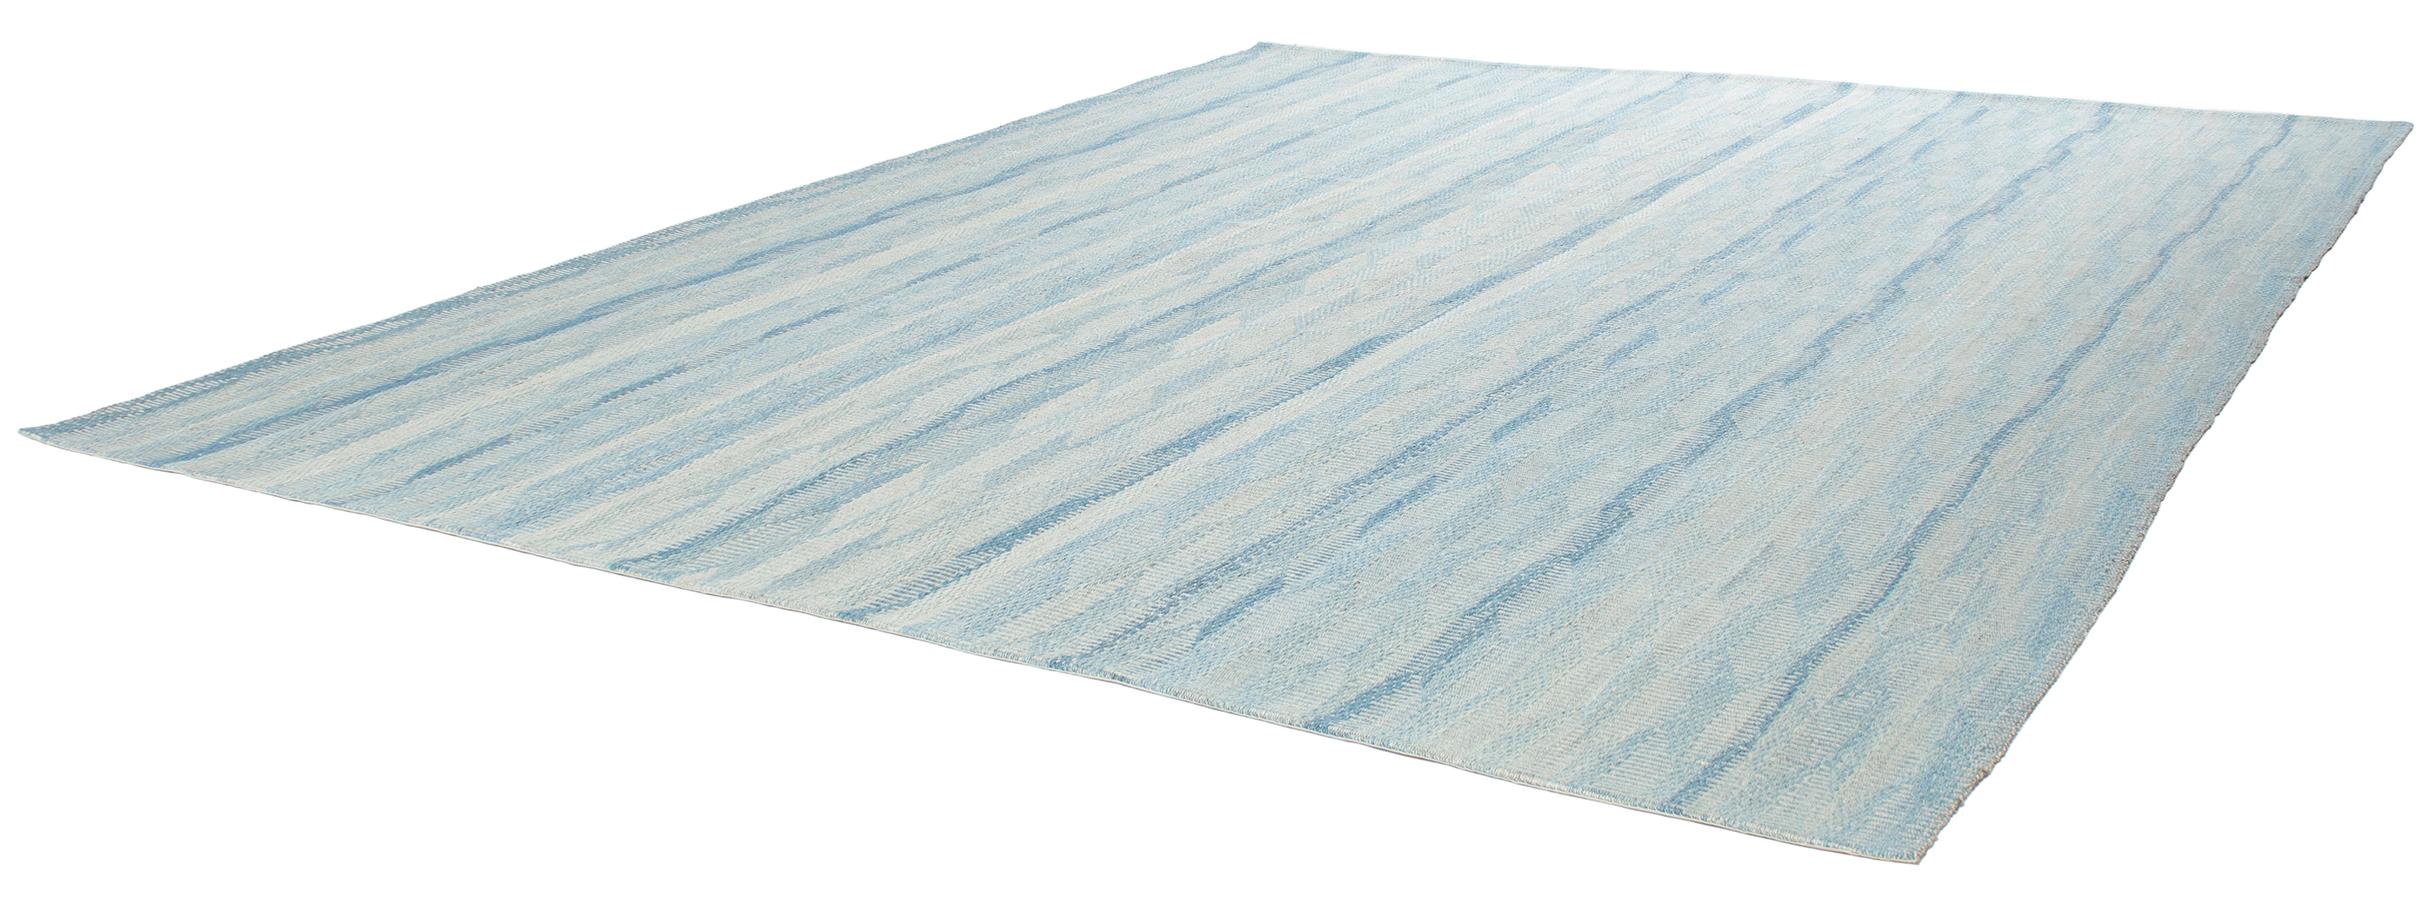 Mid-Century Modern Modern Unique Handwoven Textured Flat-Weave Rug in Shades of Blue For Sale